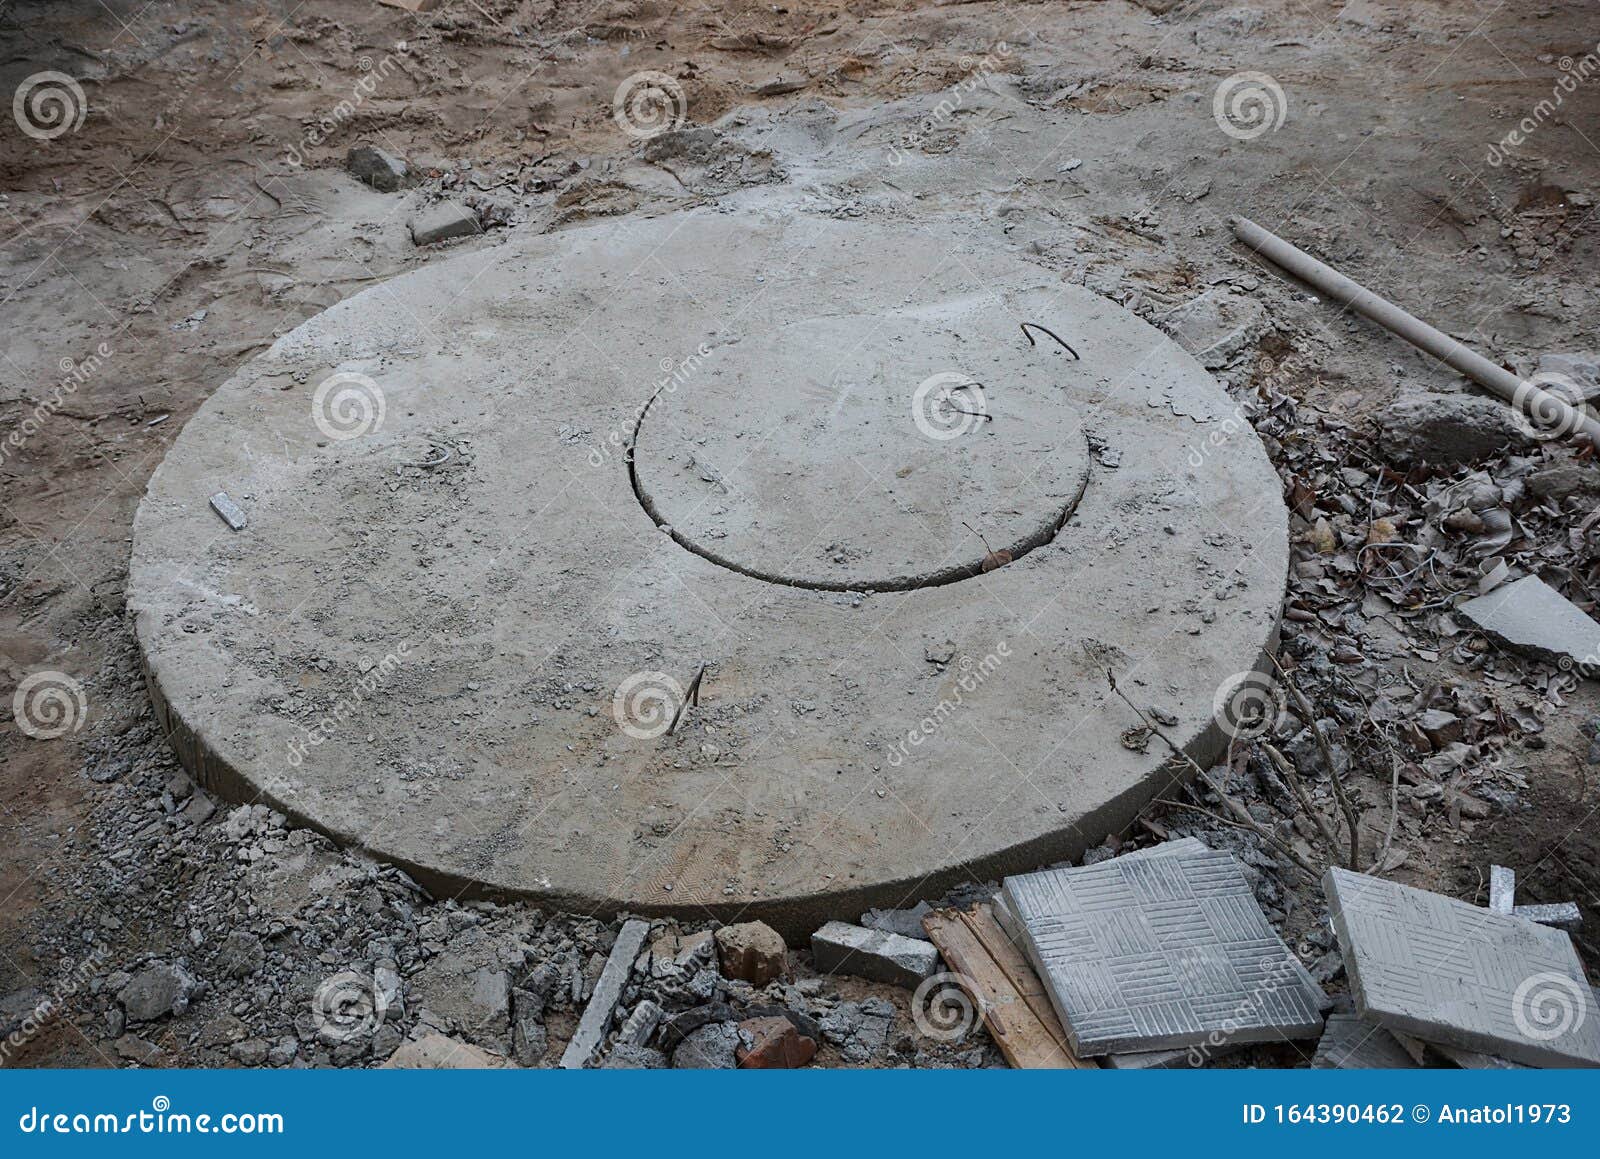 Concrete Hatch On The Street On The Road Stock Photo Image Of